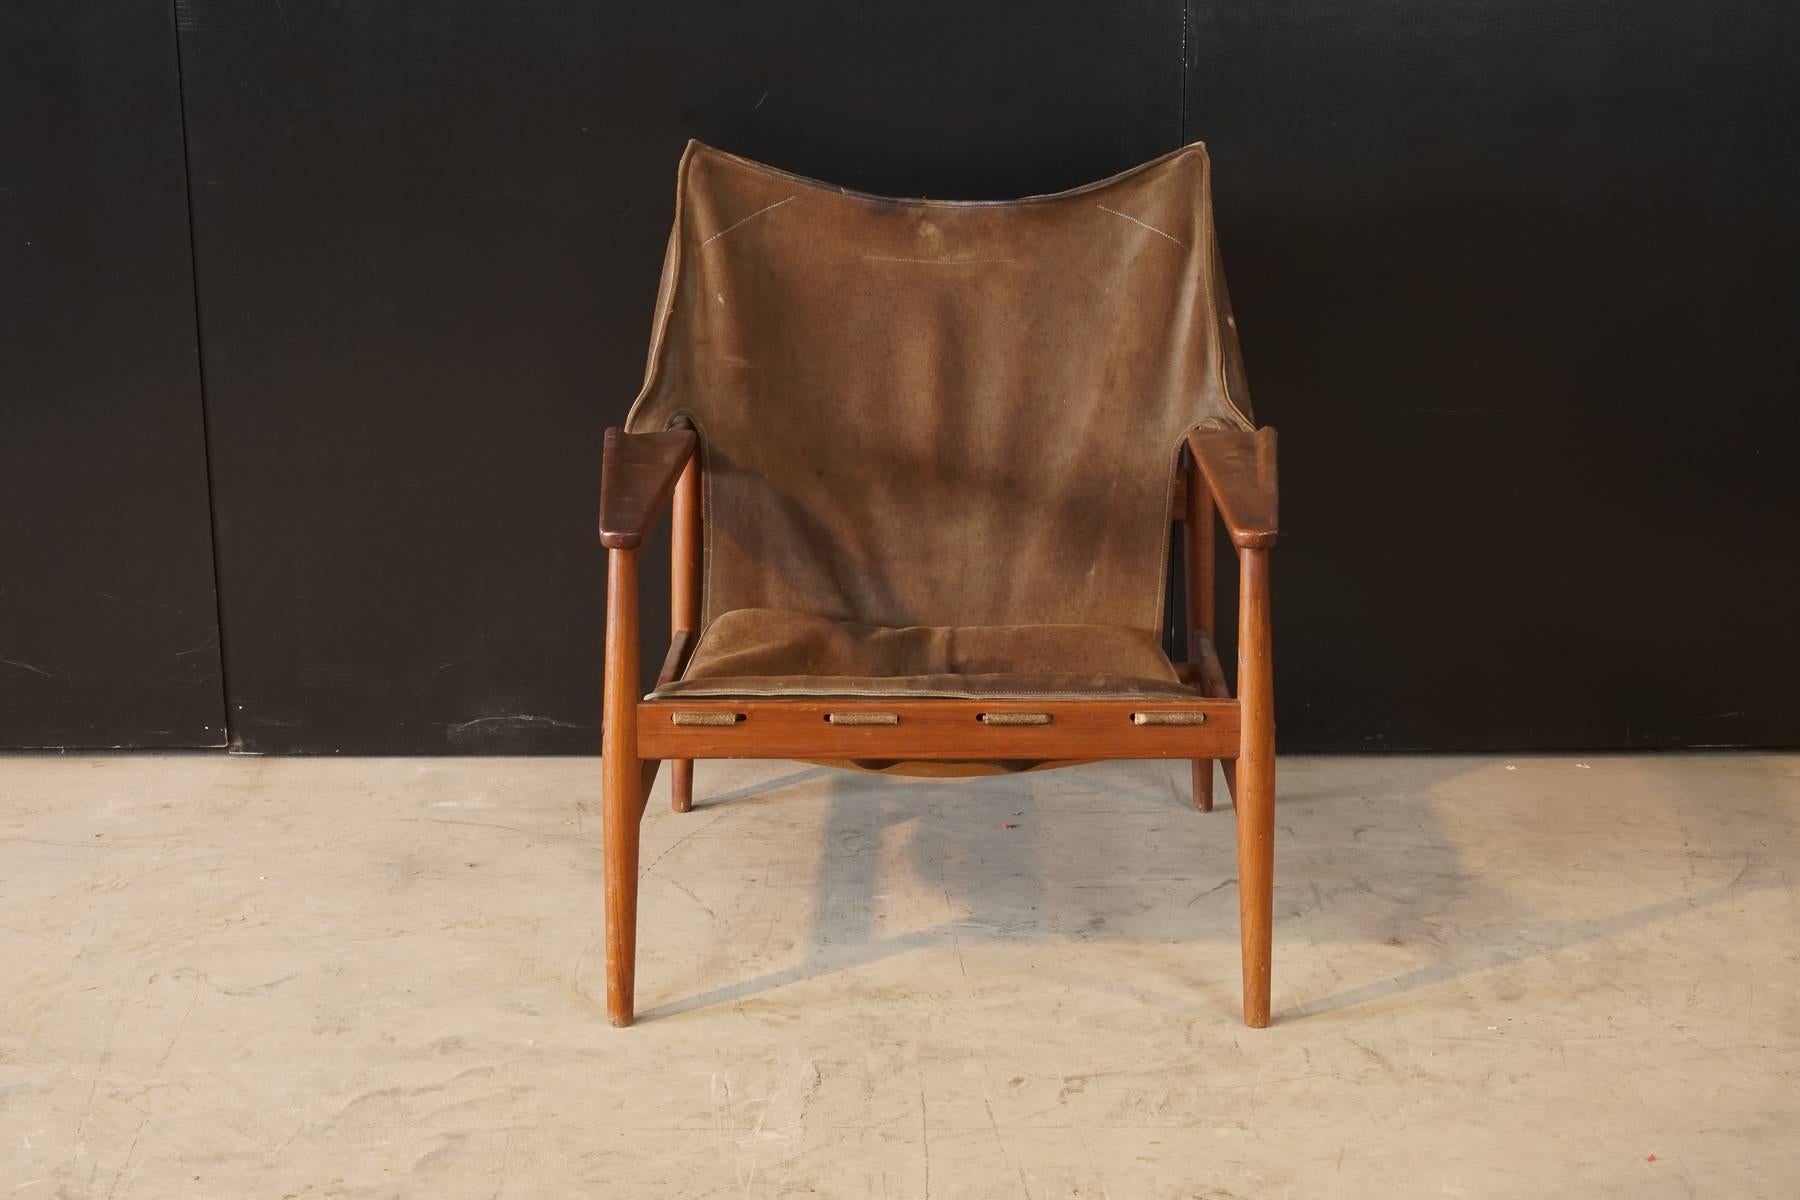 1960s Safari chair by Hans Olsen for Viskadalens Mobelfabrik AB, Sweden. Suede sling with three-buckle support fitted over a solid teak frame with carved armrests.